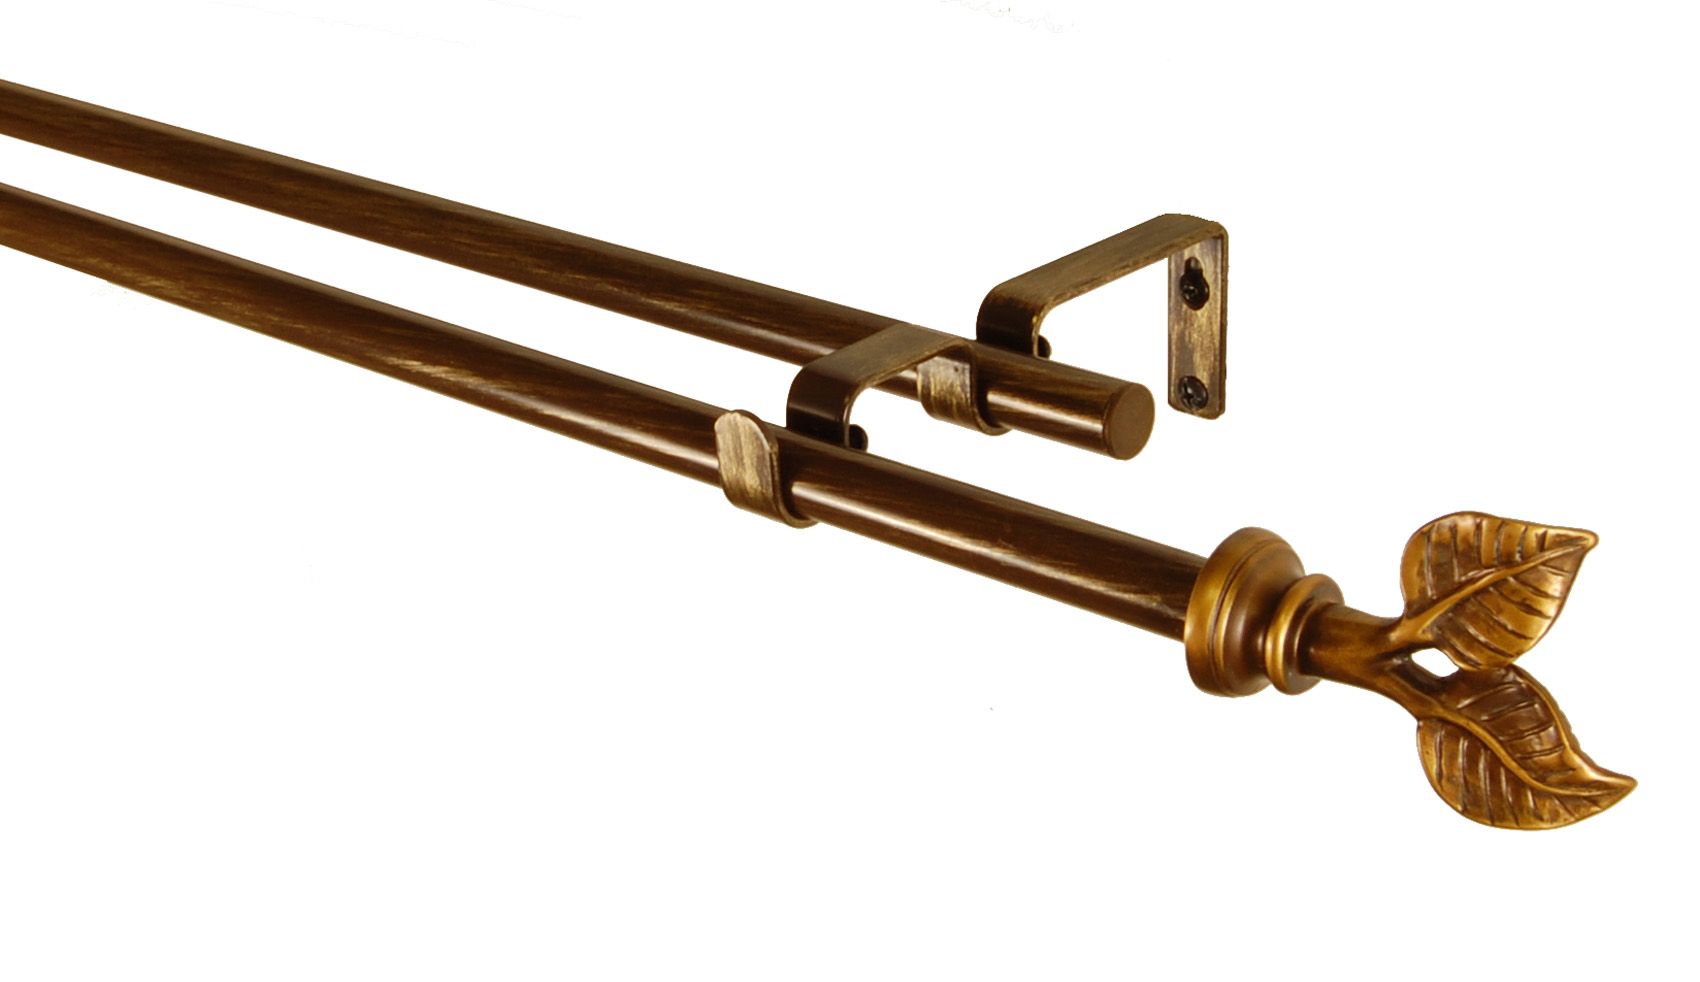 BCL Leaf Double Curtain Rod, Antique Gold Finish, 48-inch to 86-inch